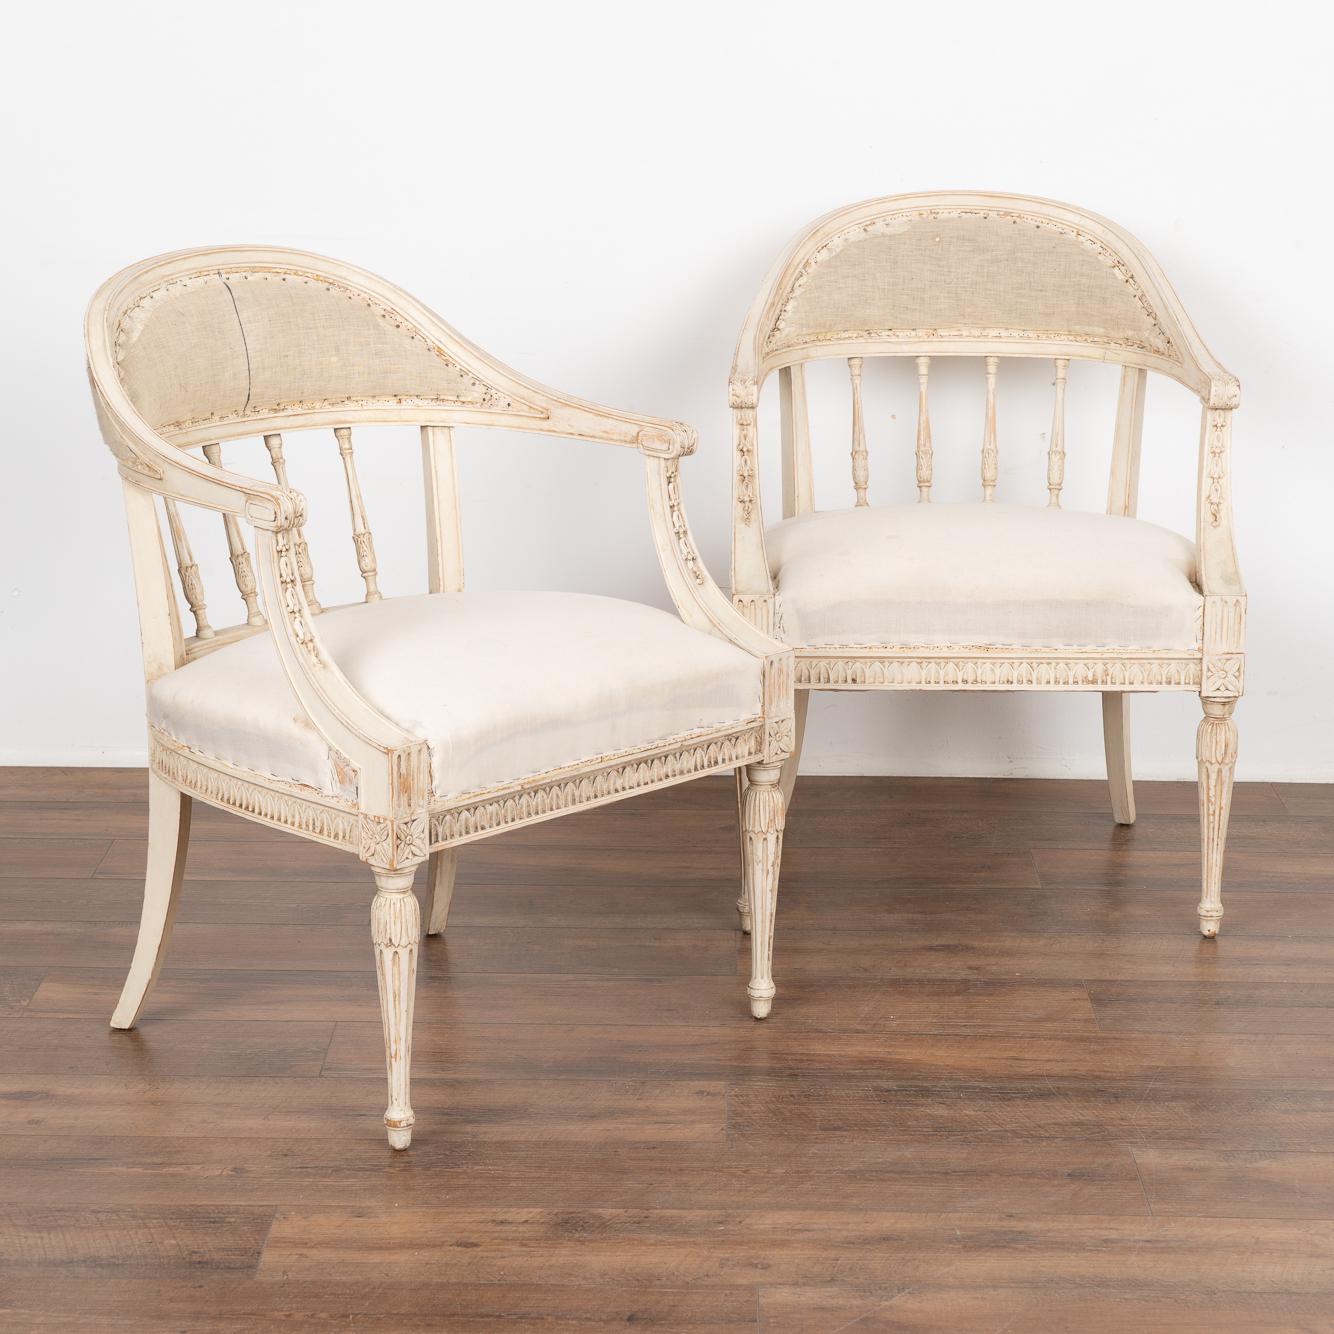 Pair, Swedish Gustavian arm chairs with a gently curved barrel back, decorative turned spindles and sabre back legs, adding to the graceful appeal of each.
Fluted turned front legs and decorative carving embellish the skirt, arms and legs. 
The